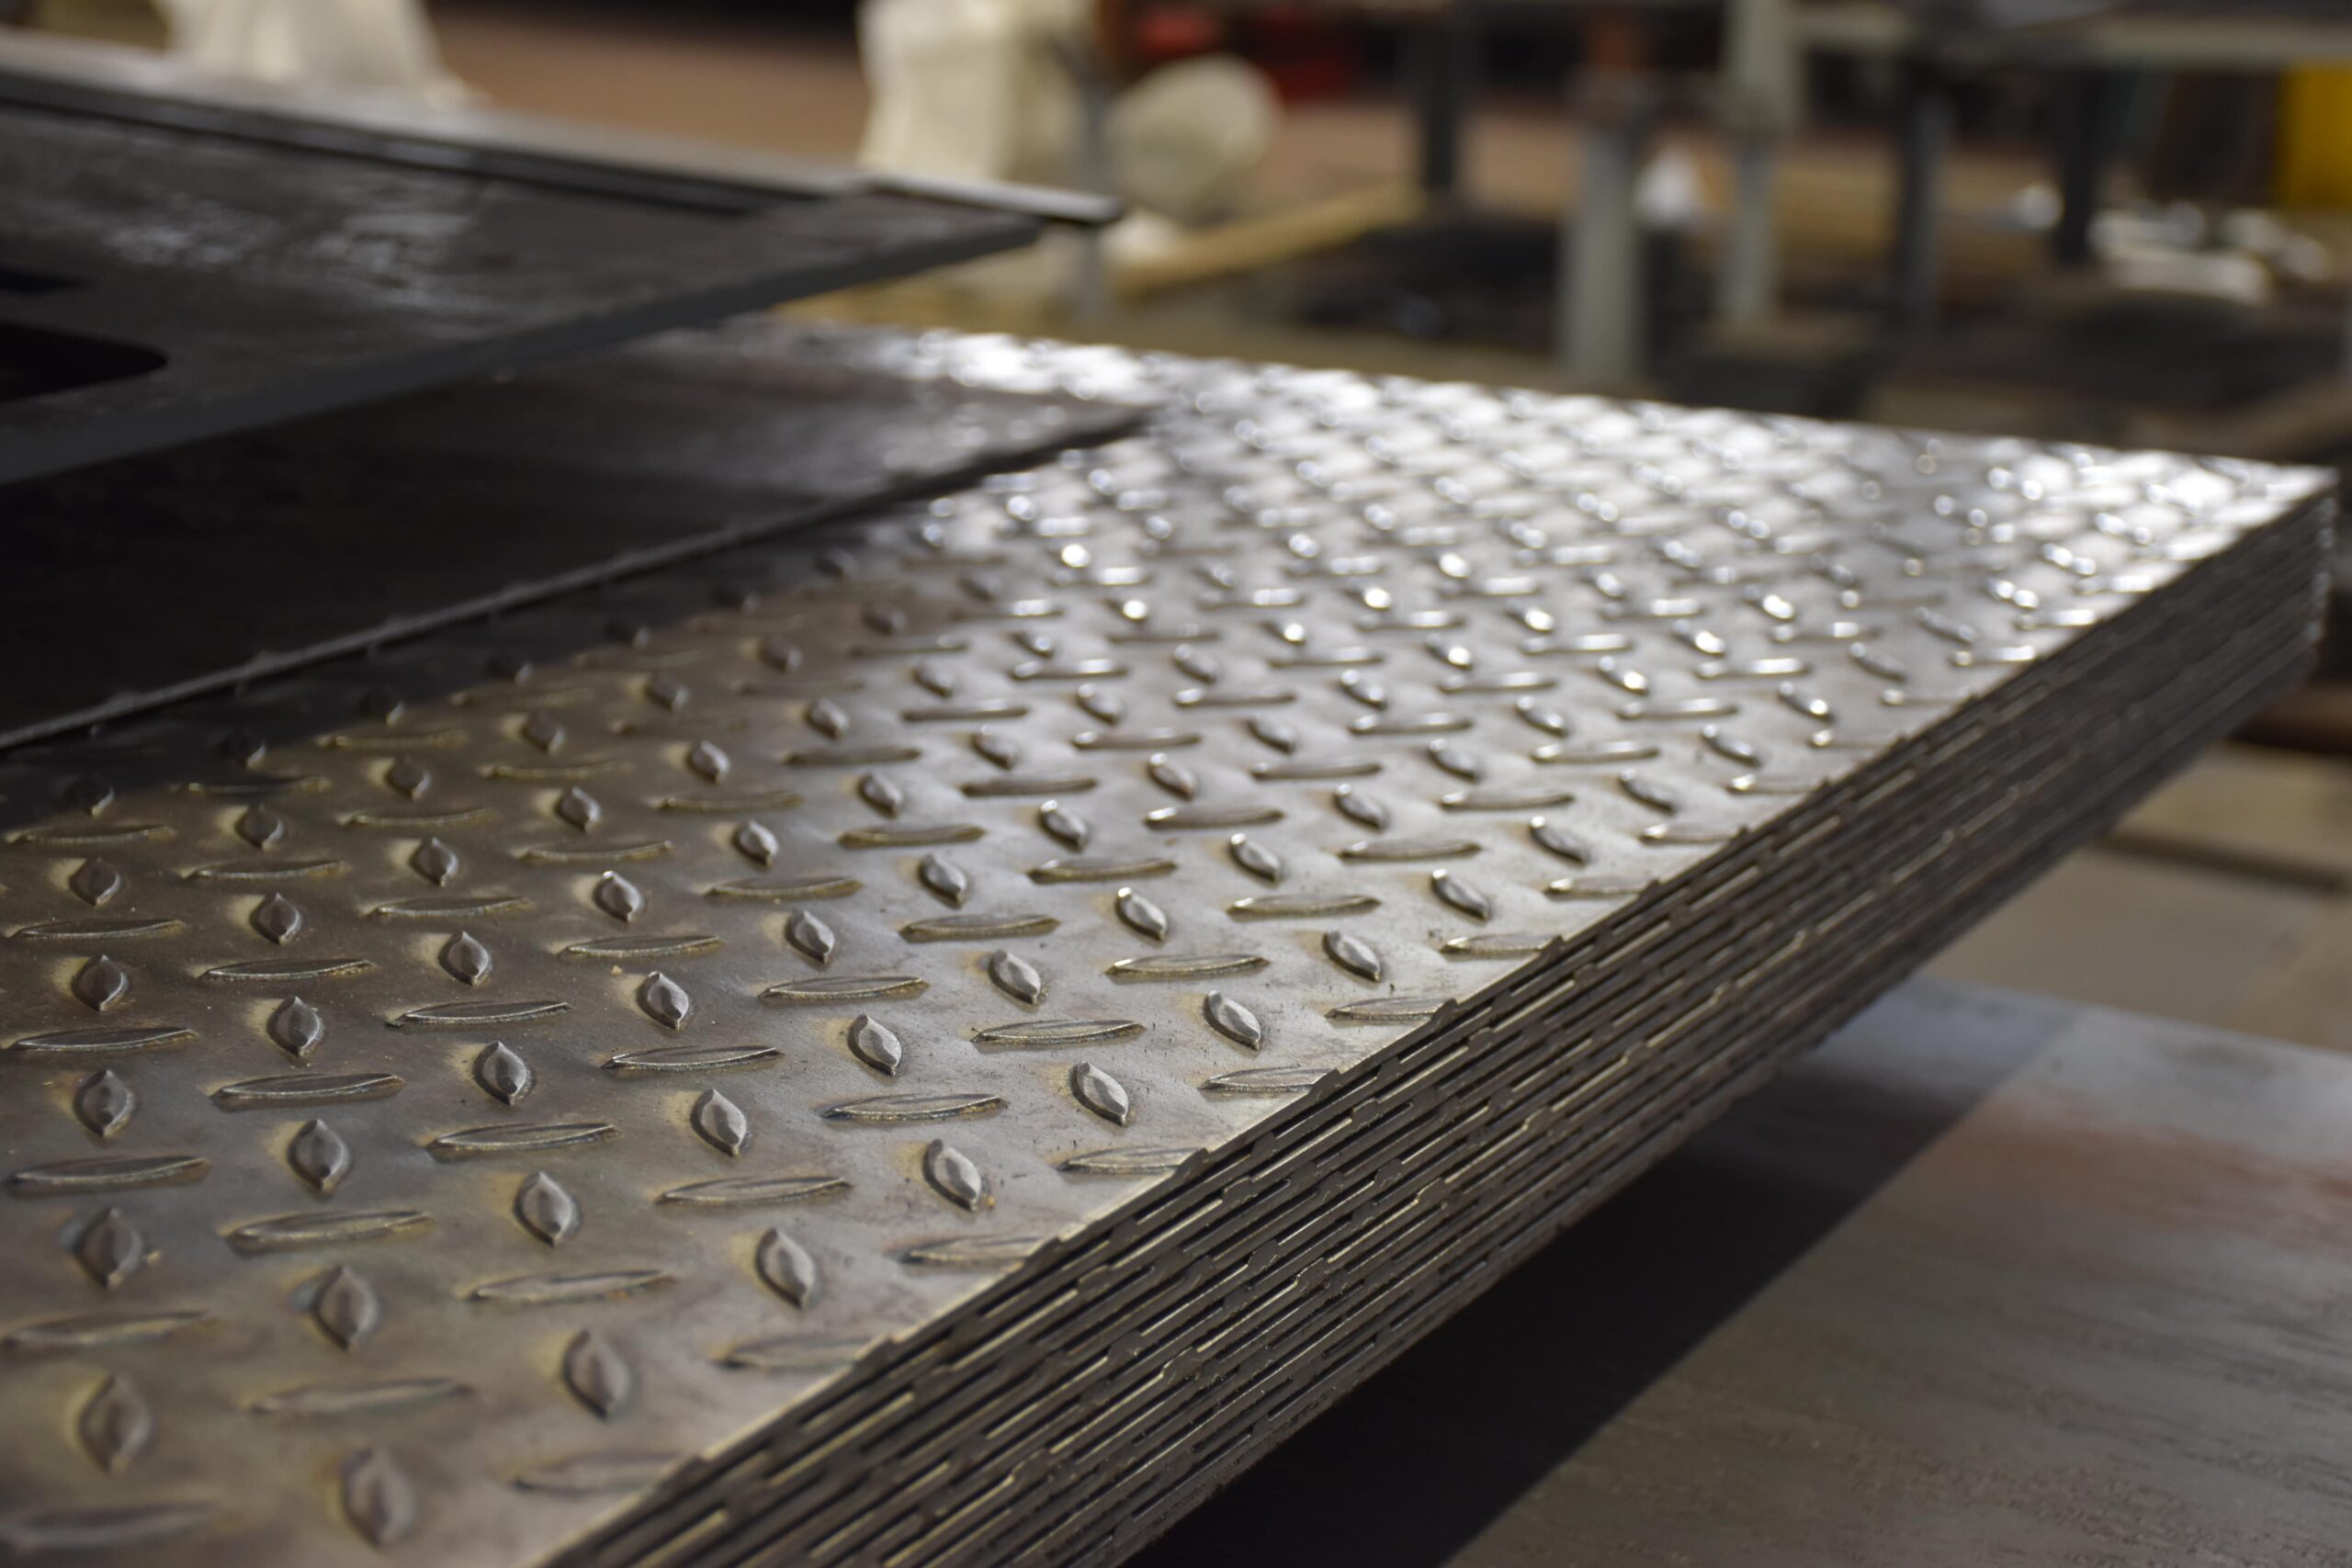 Metal sheets Vacuum lifters with pads for irregular, textured, streaked or checkered surface